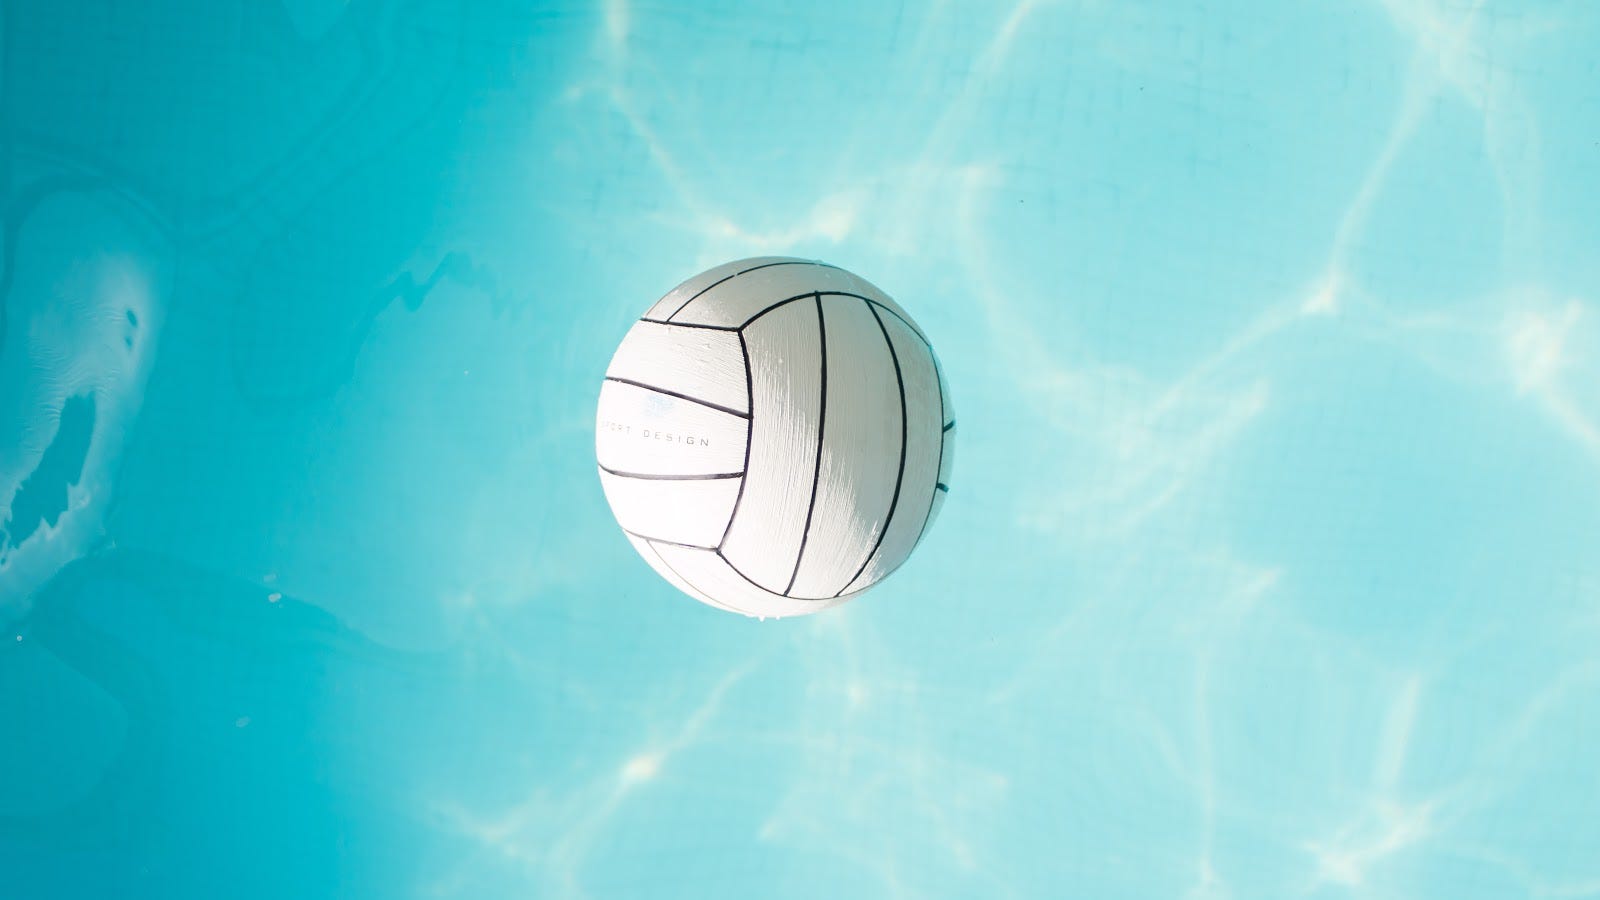 Volleyball floats up against a blue sky with clouds. 